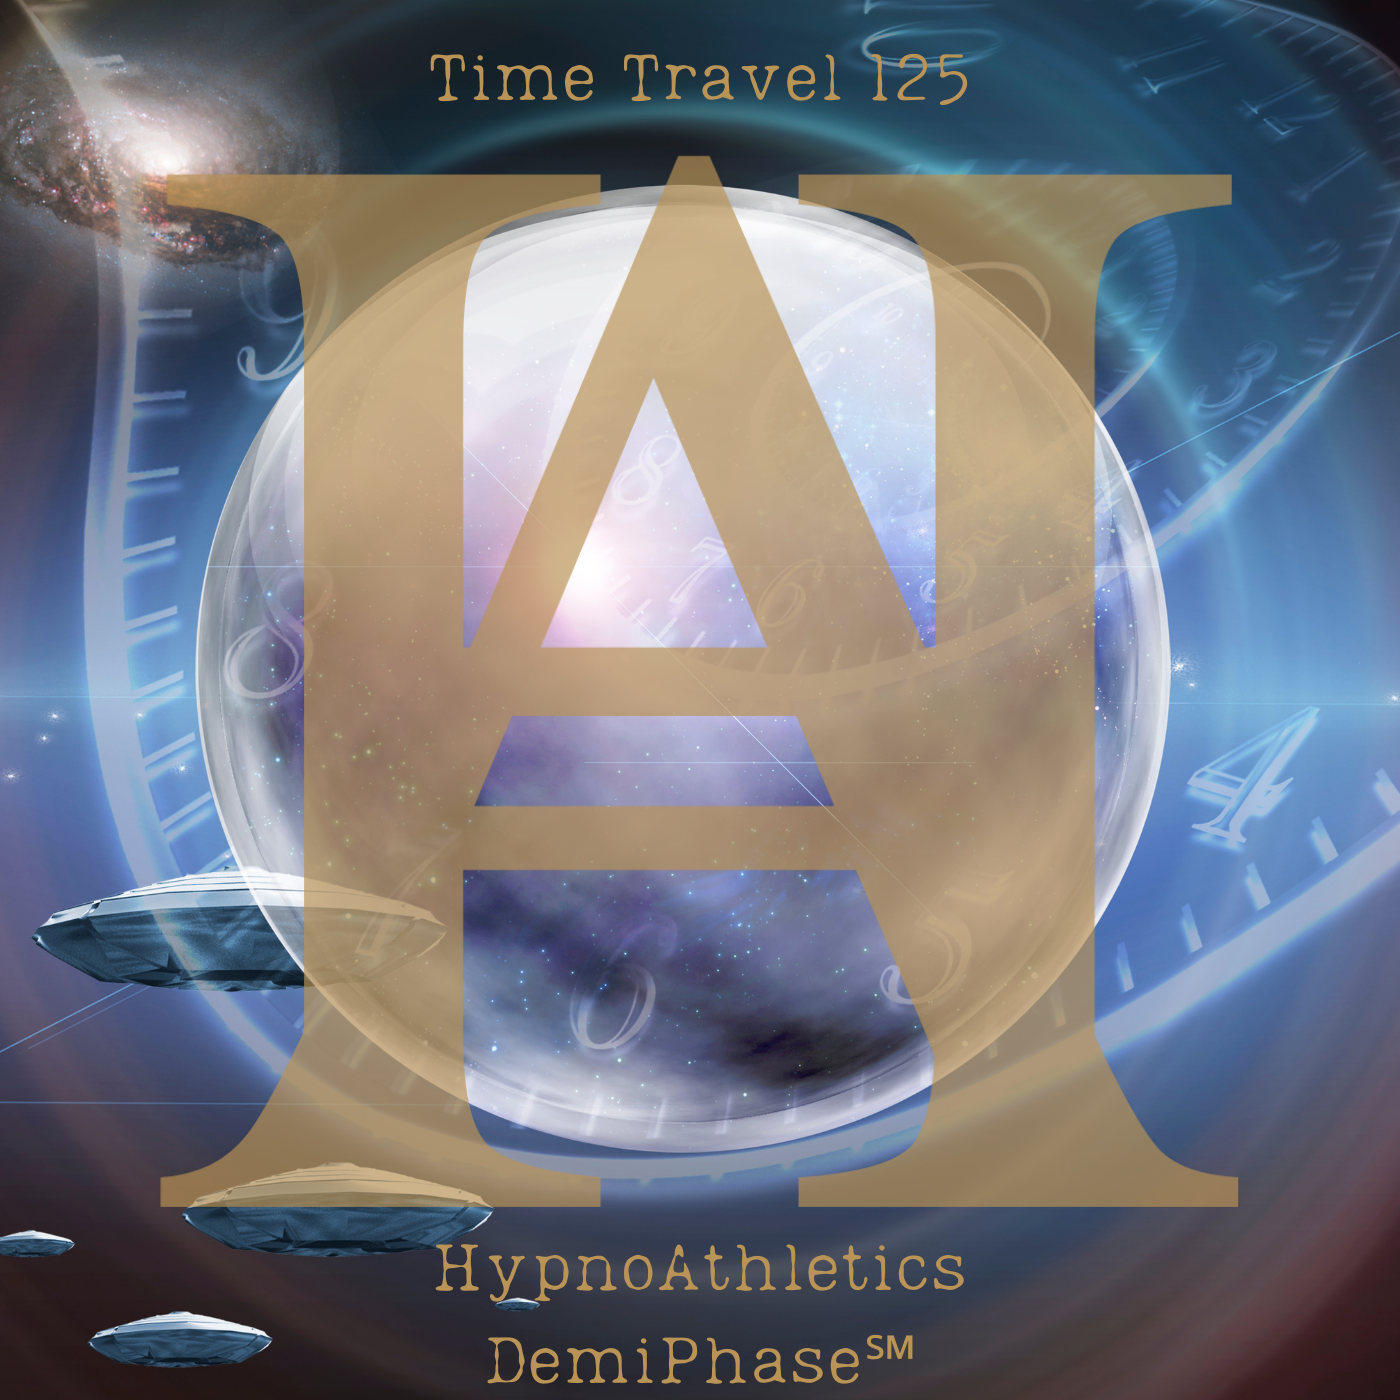 How To Time-Travel Using Hypnosis And Sound Waves